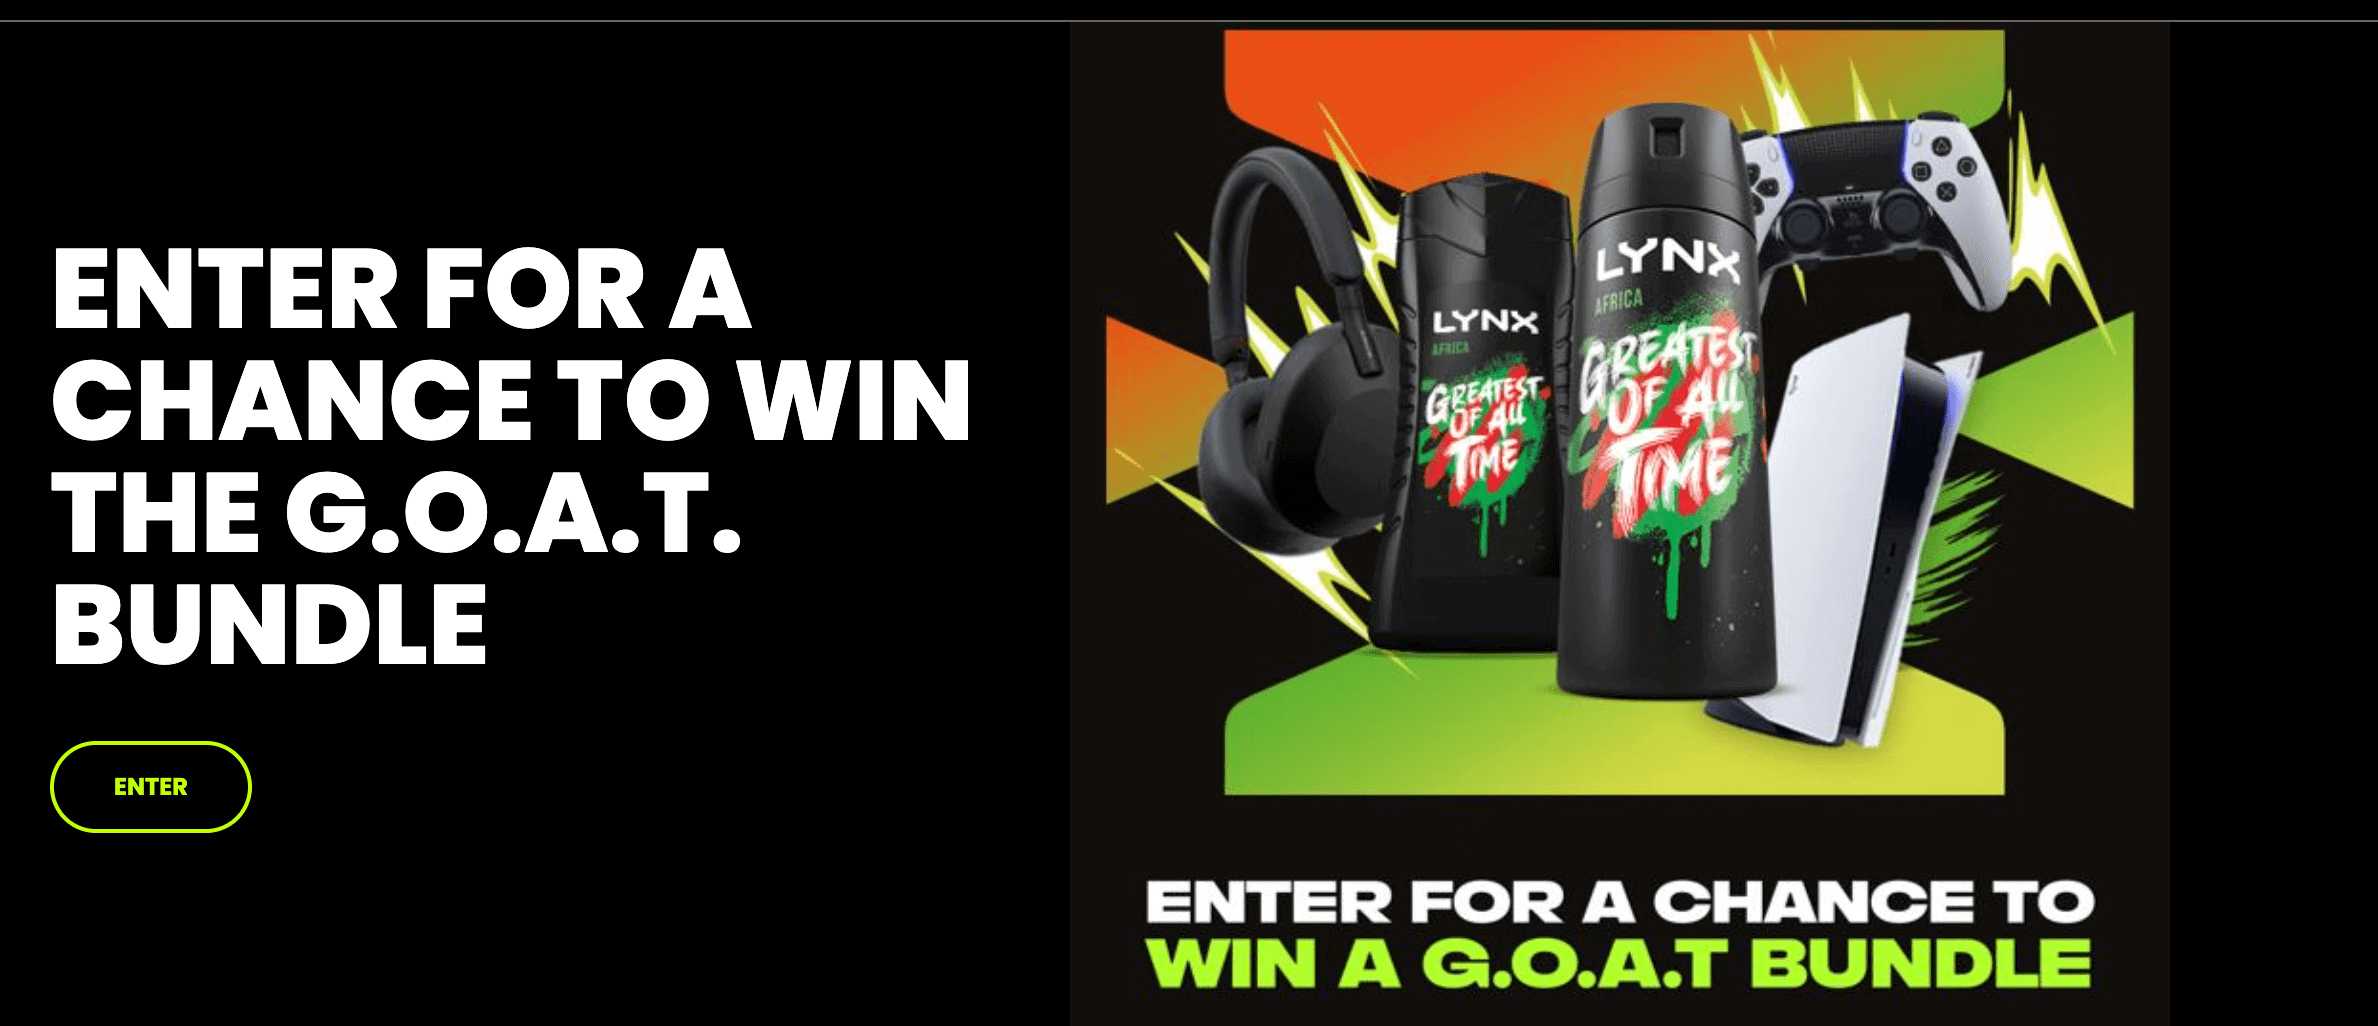 LYNX Get Goated Competition: Win Big Prizes